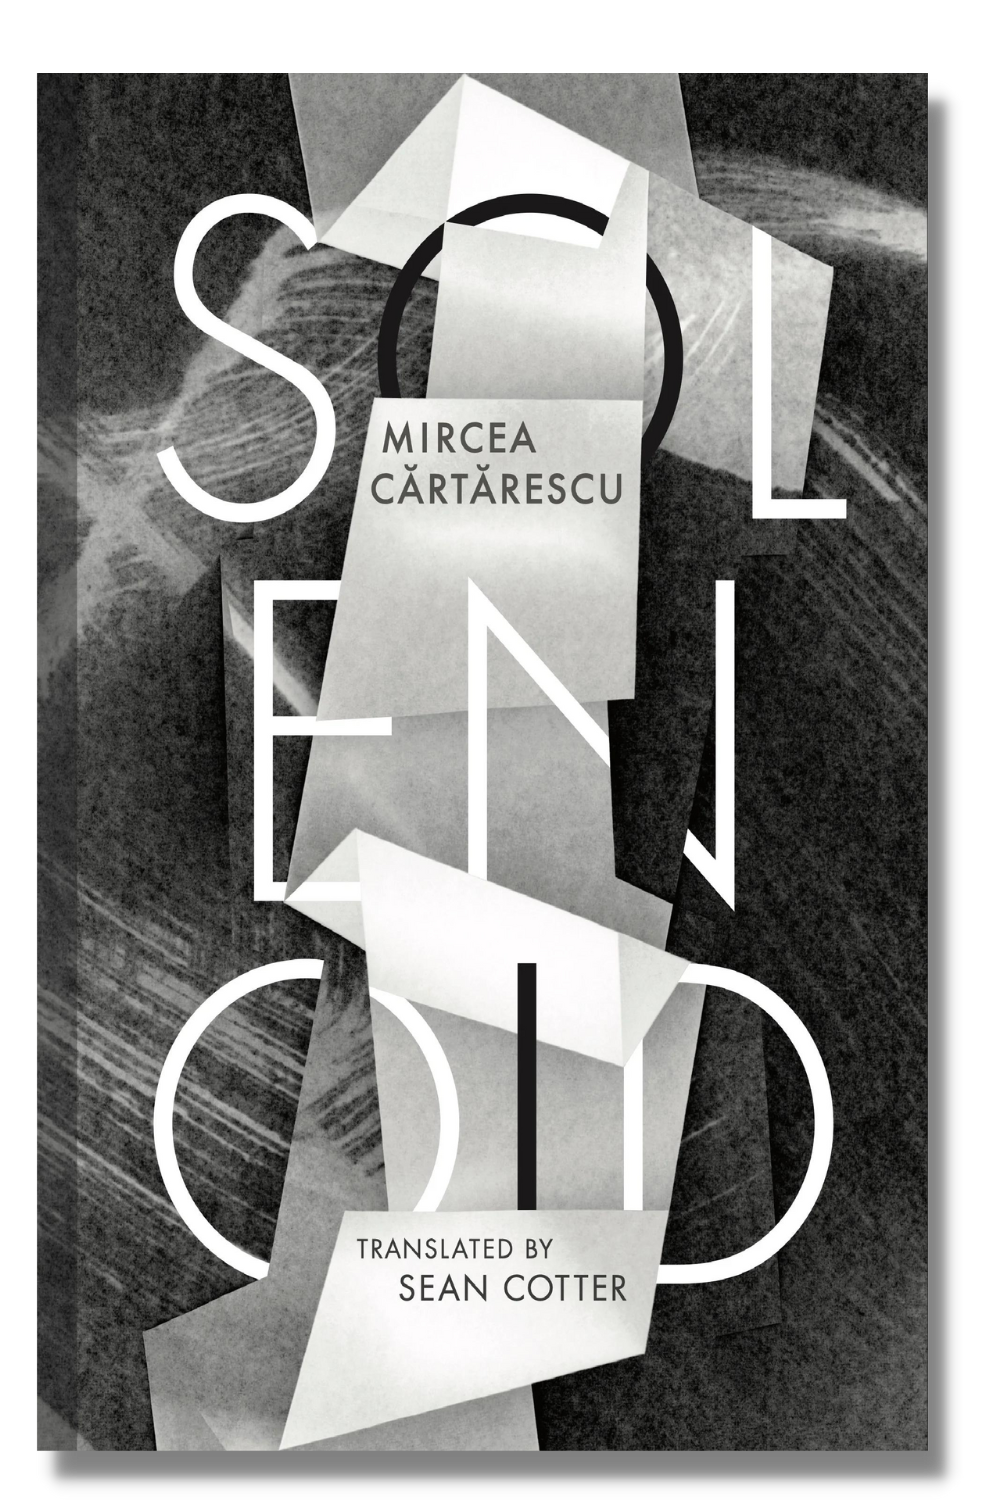 The cover of "Solenoid"